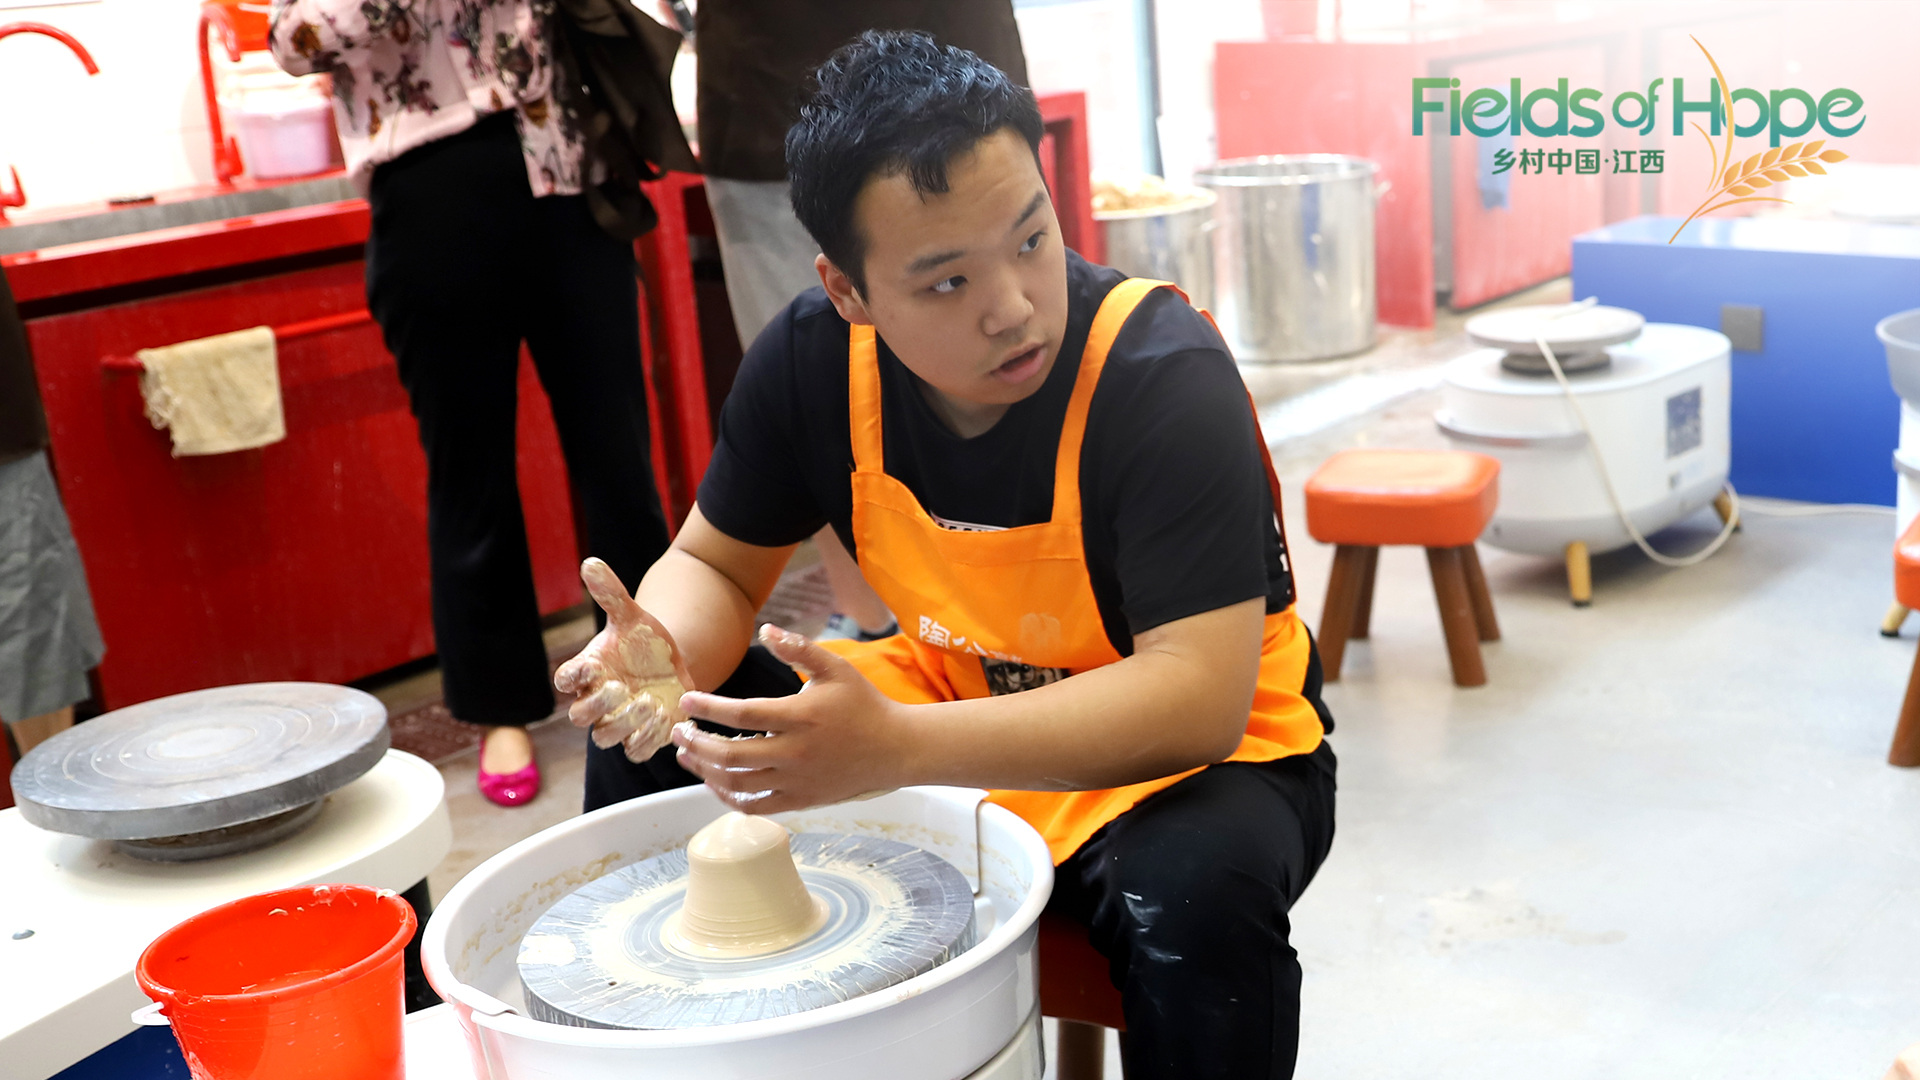 The DIY experience is proving exceptionally popular as many visitors are eager to dip their fingers in the clay after visiting the kilns and museums in Jingdezhen, which is also known as China’s porcelain capital. /CGTN